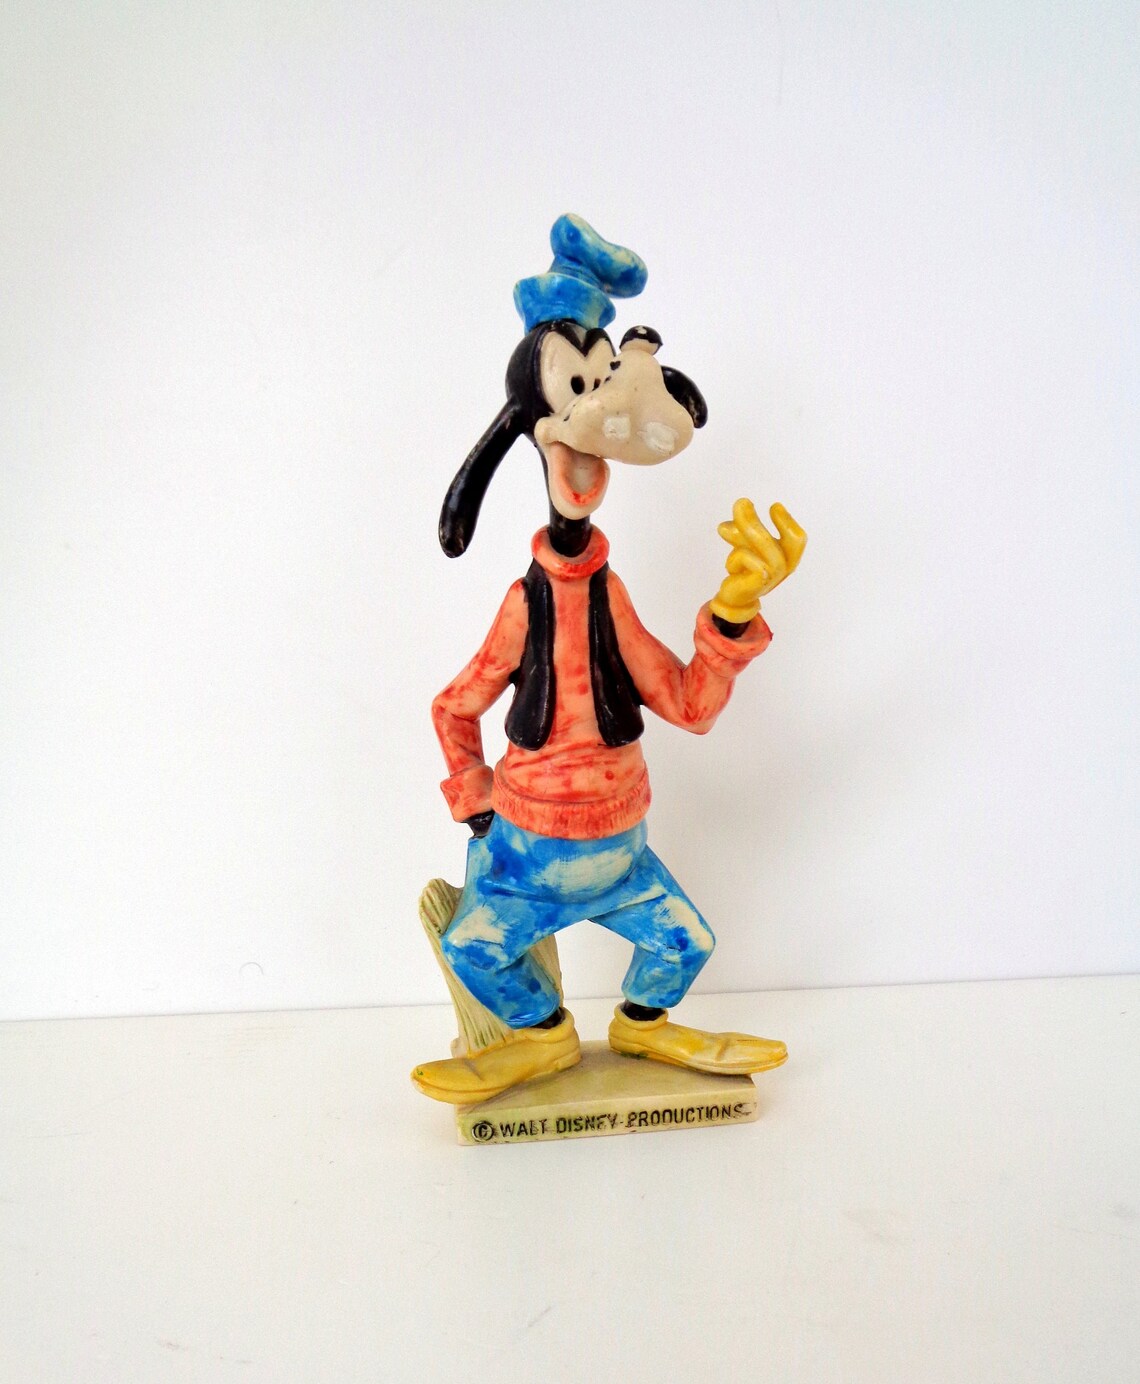 Collectable 60s character Goofy Vintage figurine cartoon | Etsy